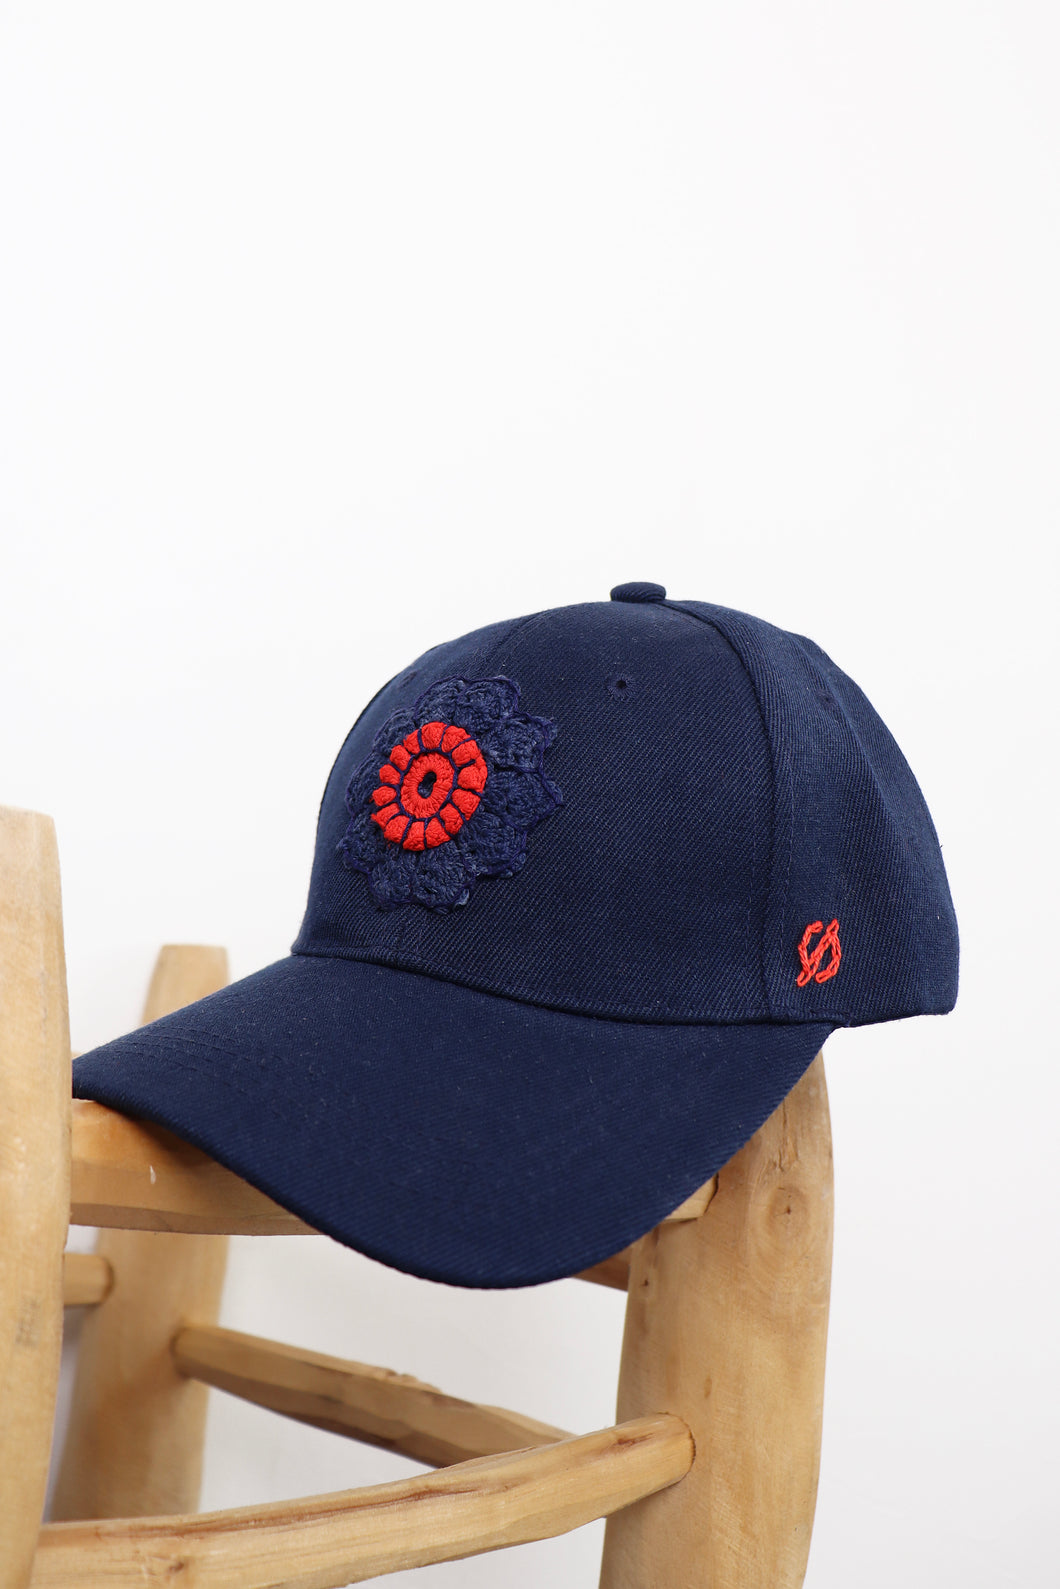 N°56 - CASQUETTE UPCYCLÉE